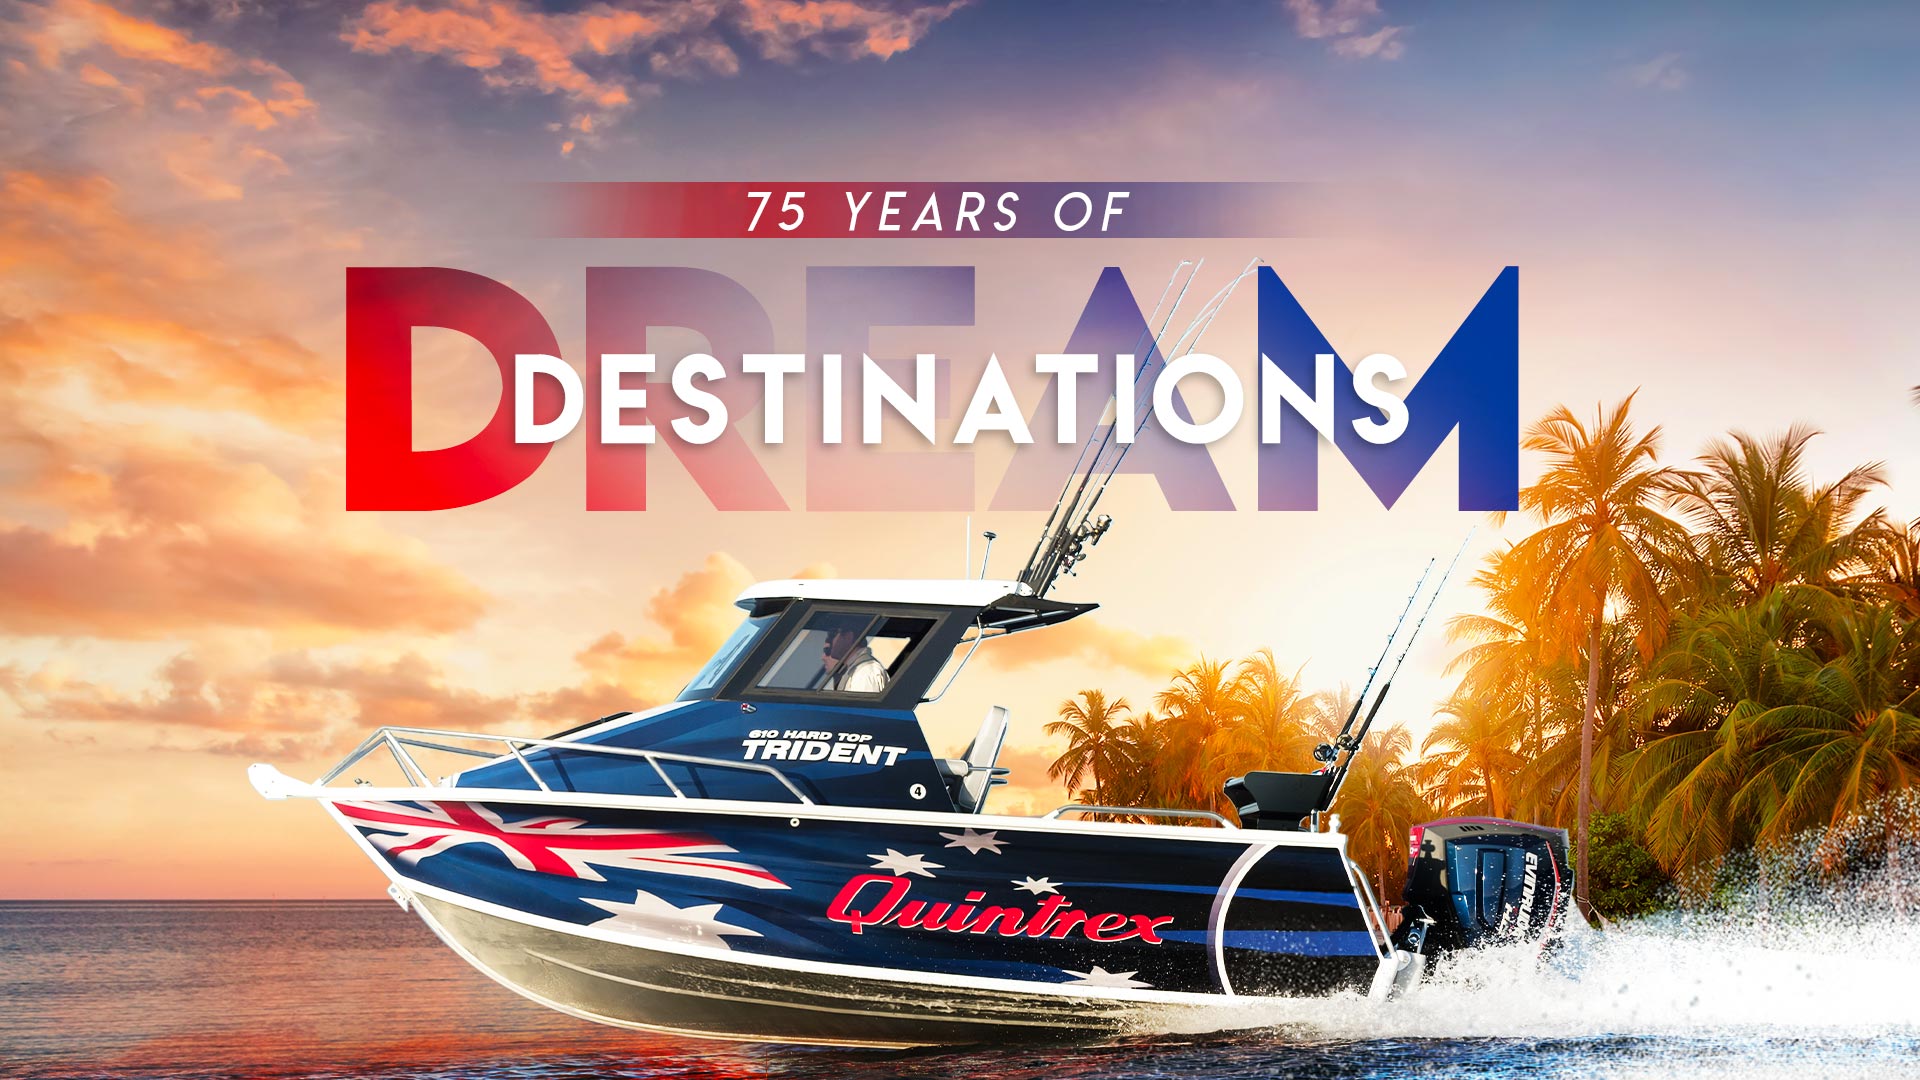 75 Years of Dream Destinations